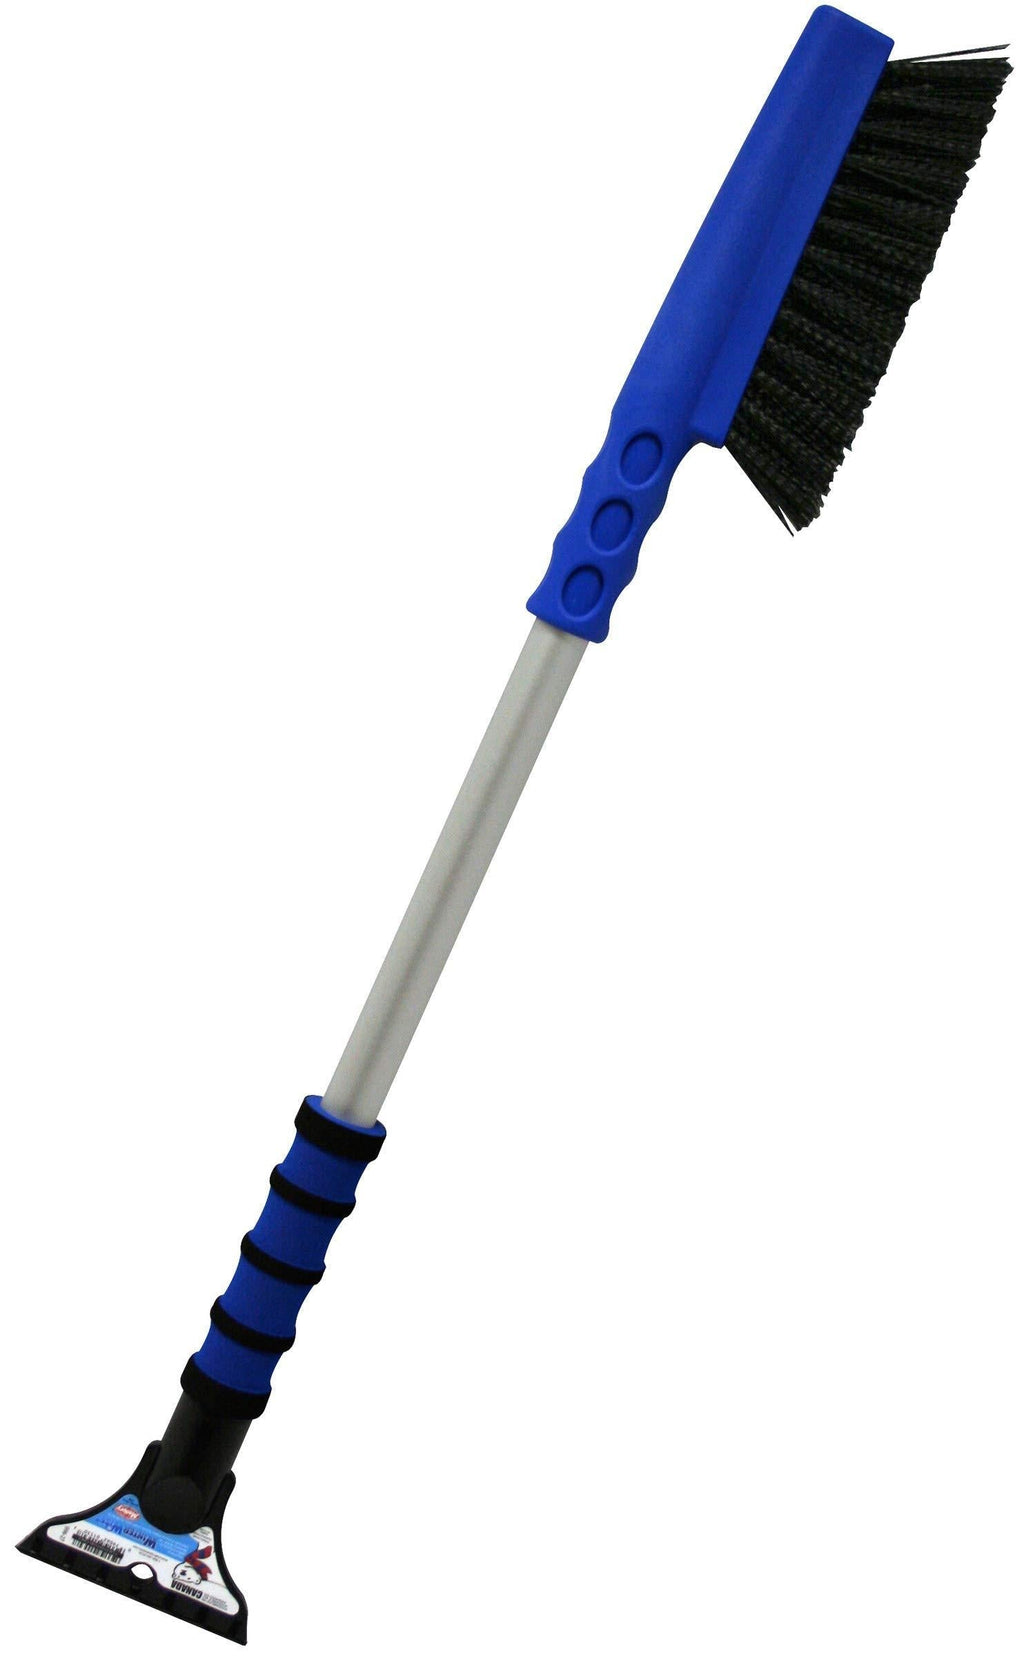  [AUSTRALIA] - Mallory 996-35 MAXX 35" Snow Brush with Intergrated Ice Scraper and Foam Grip Handle (Colors may vary) 1